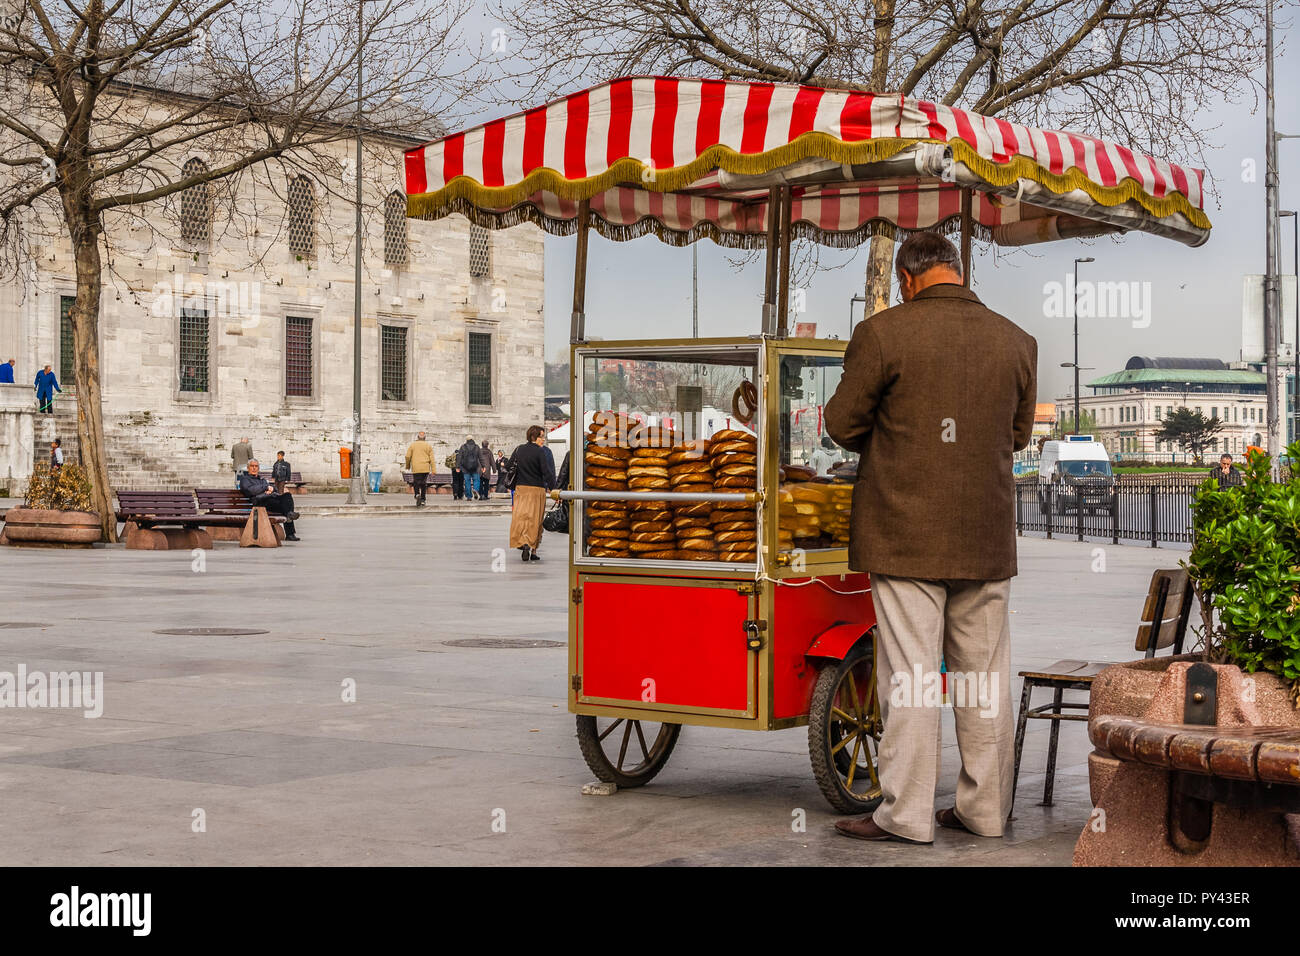 Istanbul, Turkey,April 5. 2012: Man selling simit (Turkish bagels) from a cart. Stock Photo